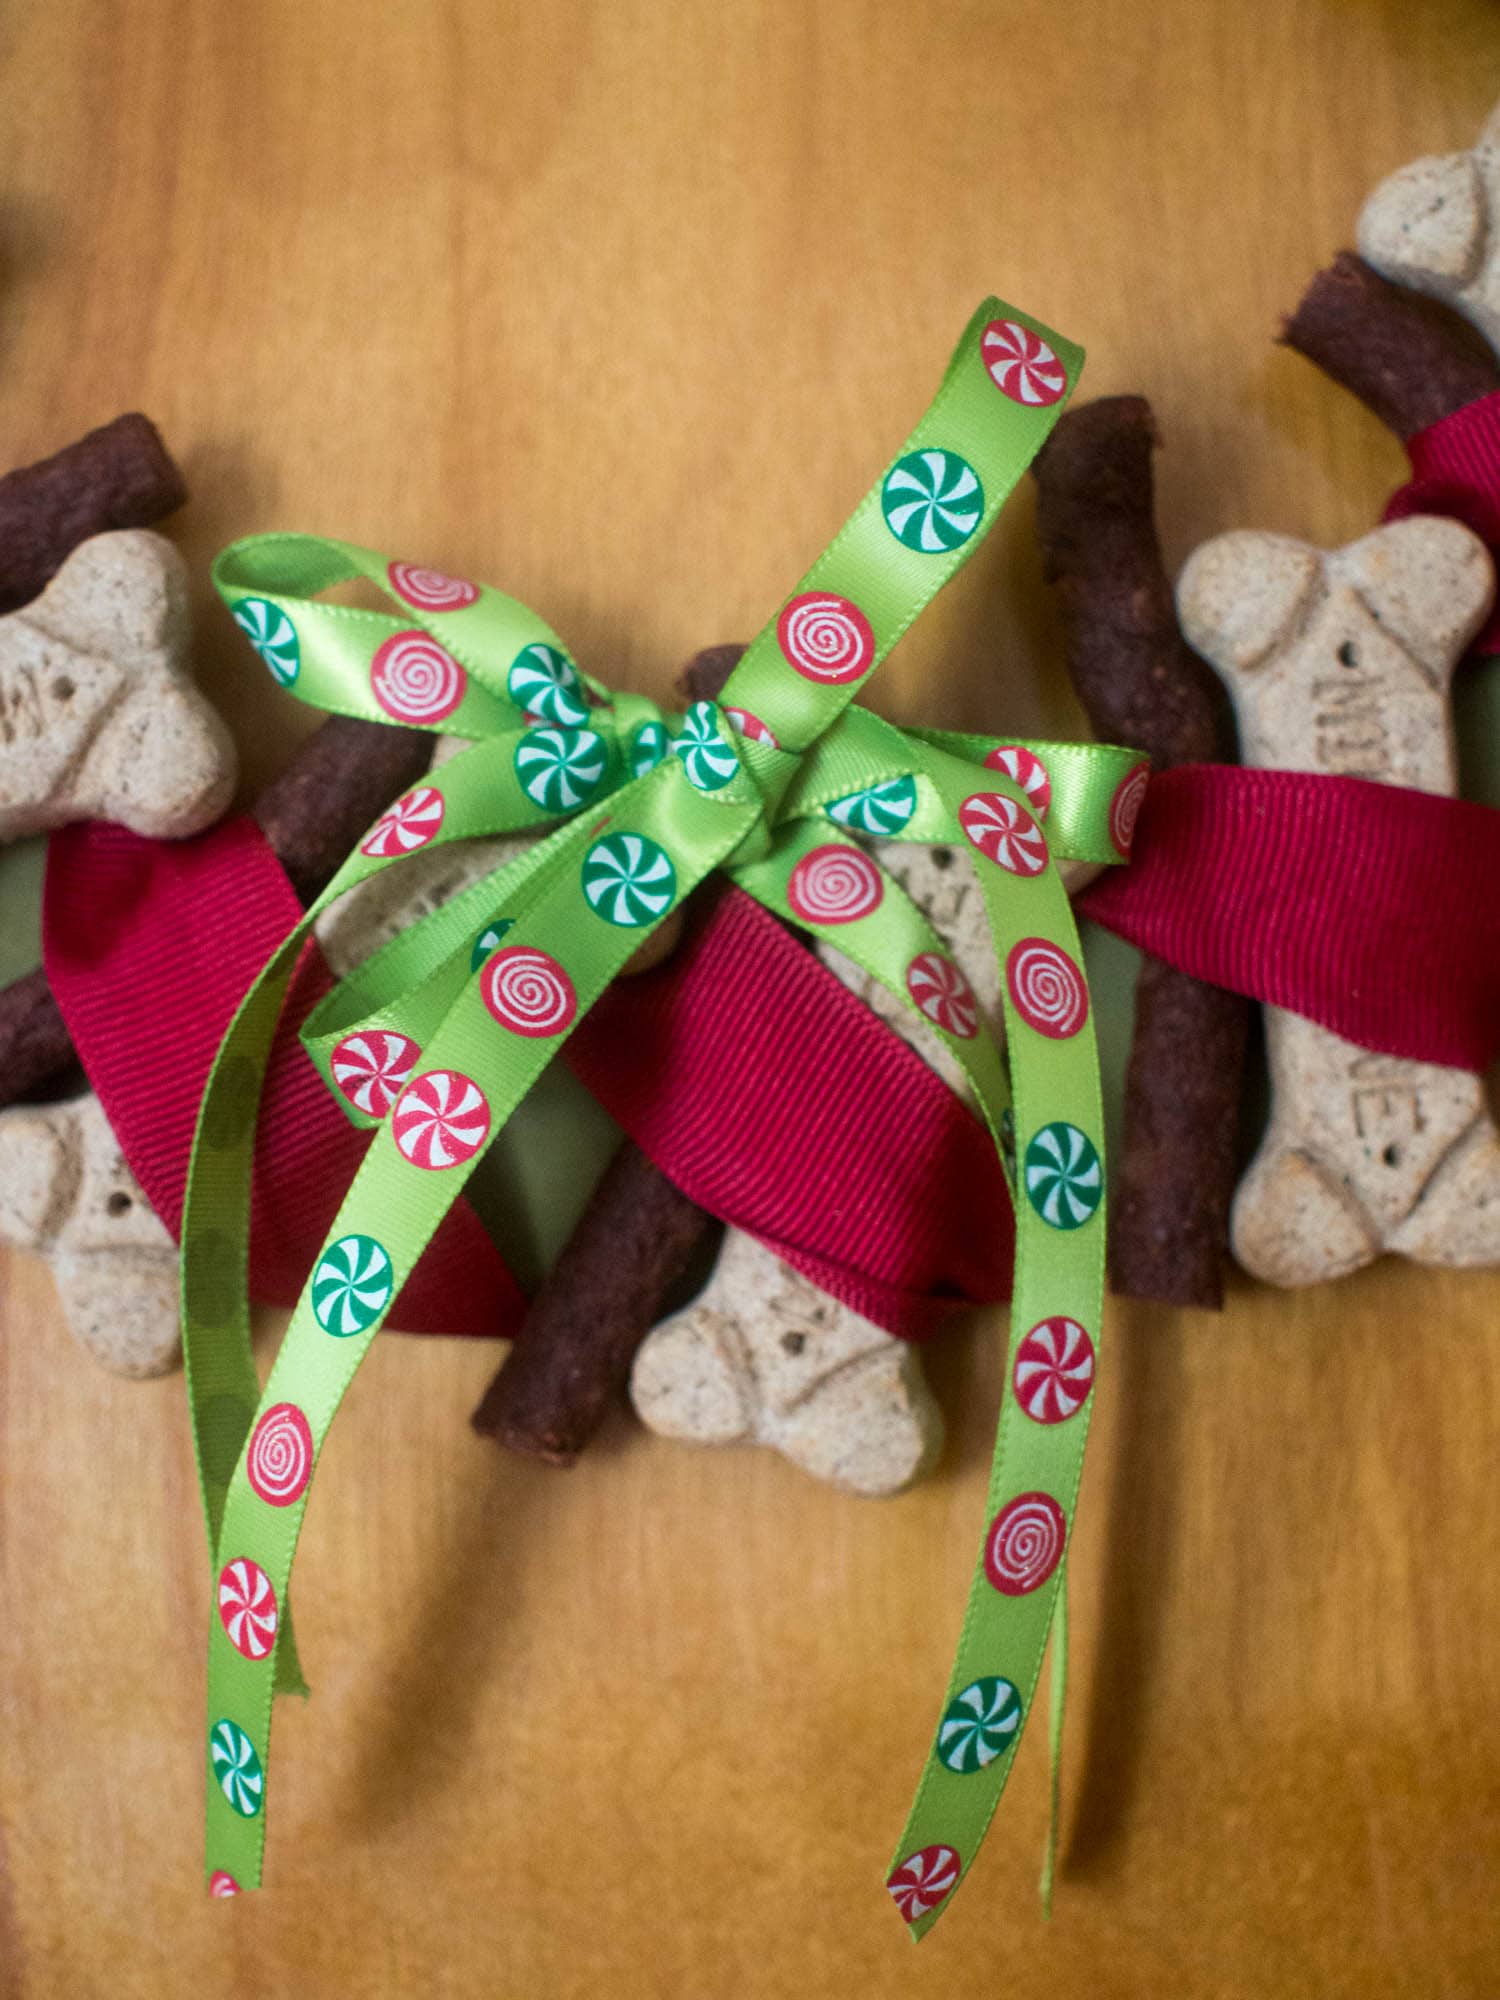 A christmas wreath with candy canes and dog treats.